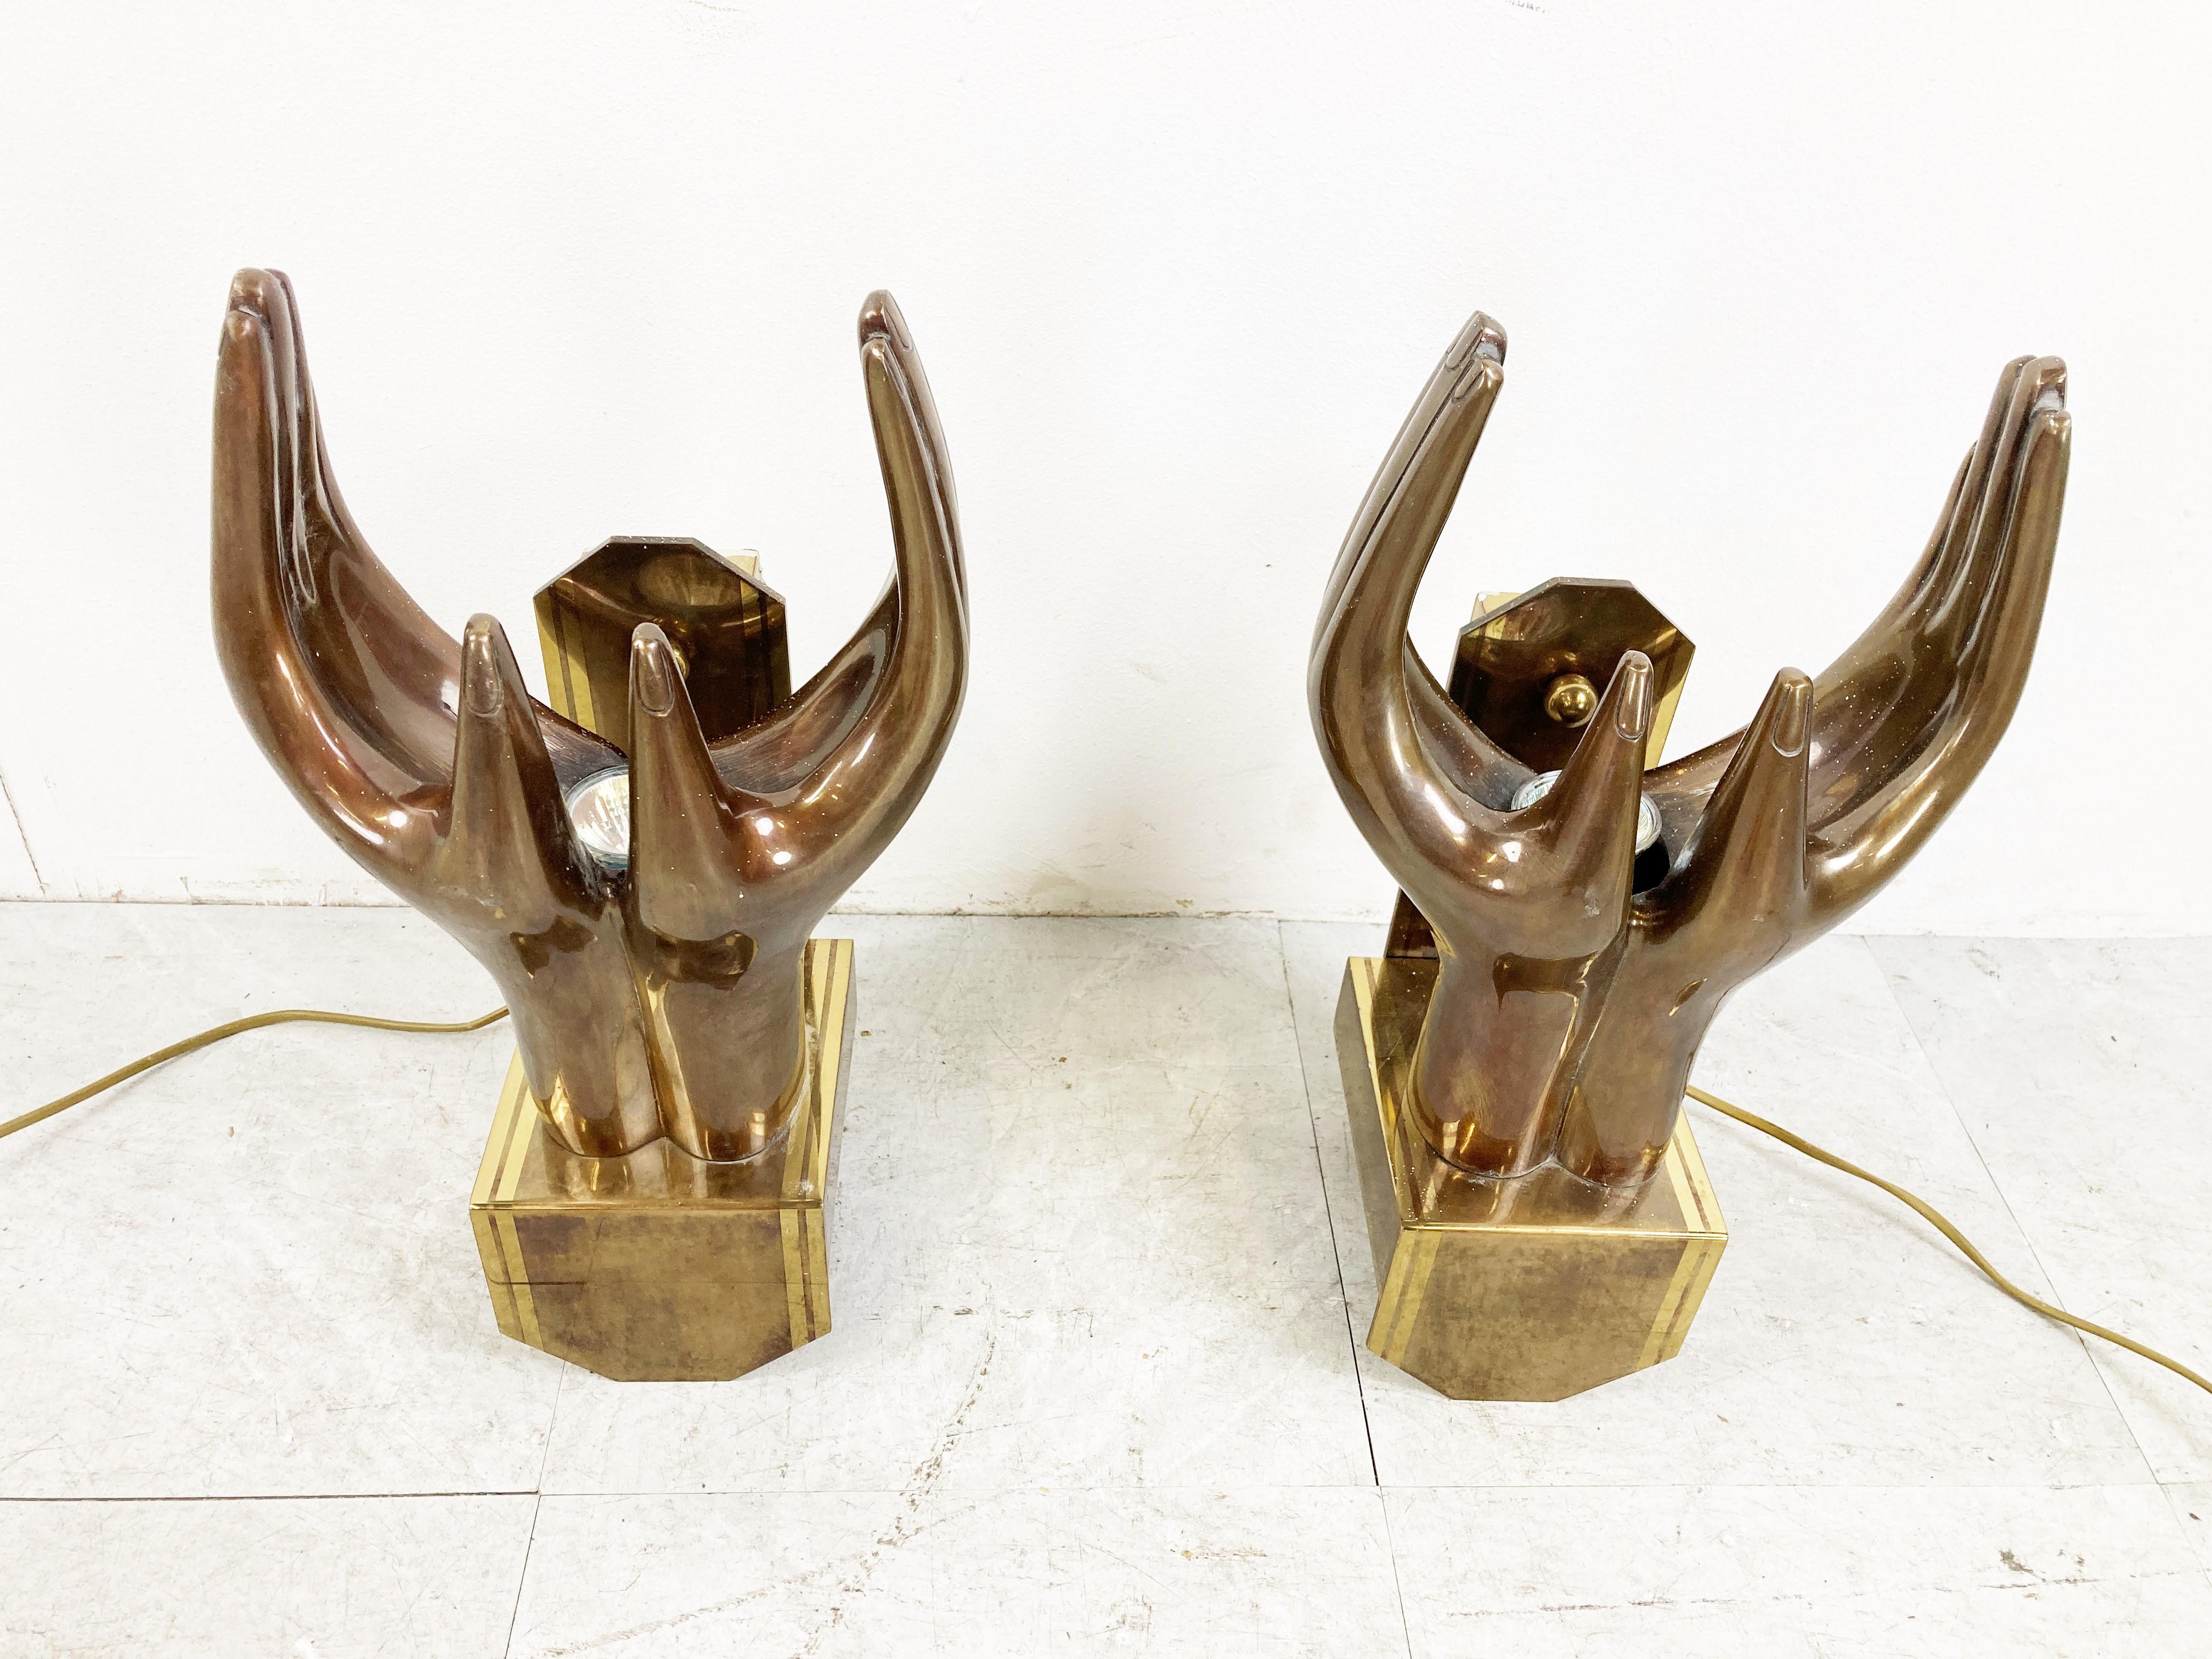 Spectacular pair of double hand solid bronze wall sconces signed by De Gandt '91.

Beautiful timeless look and real statement pieces. 

1990s - Belgium

Good condition, tested and ready to use with GU10 spot lamps

Work with GU 10 spots